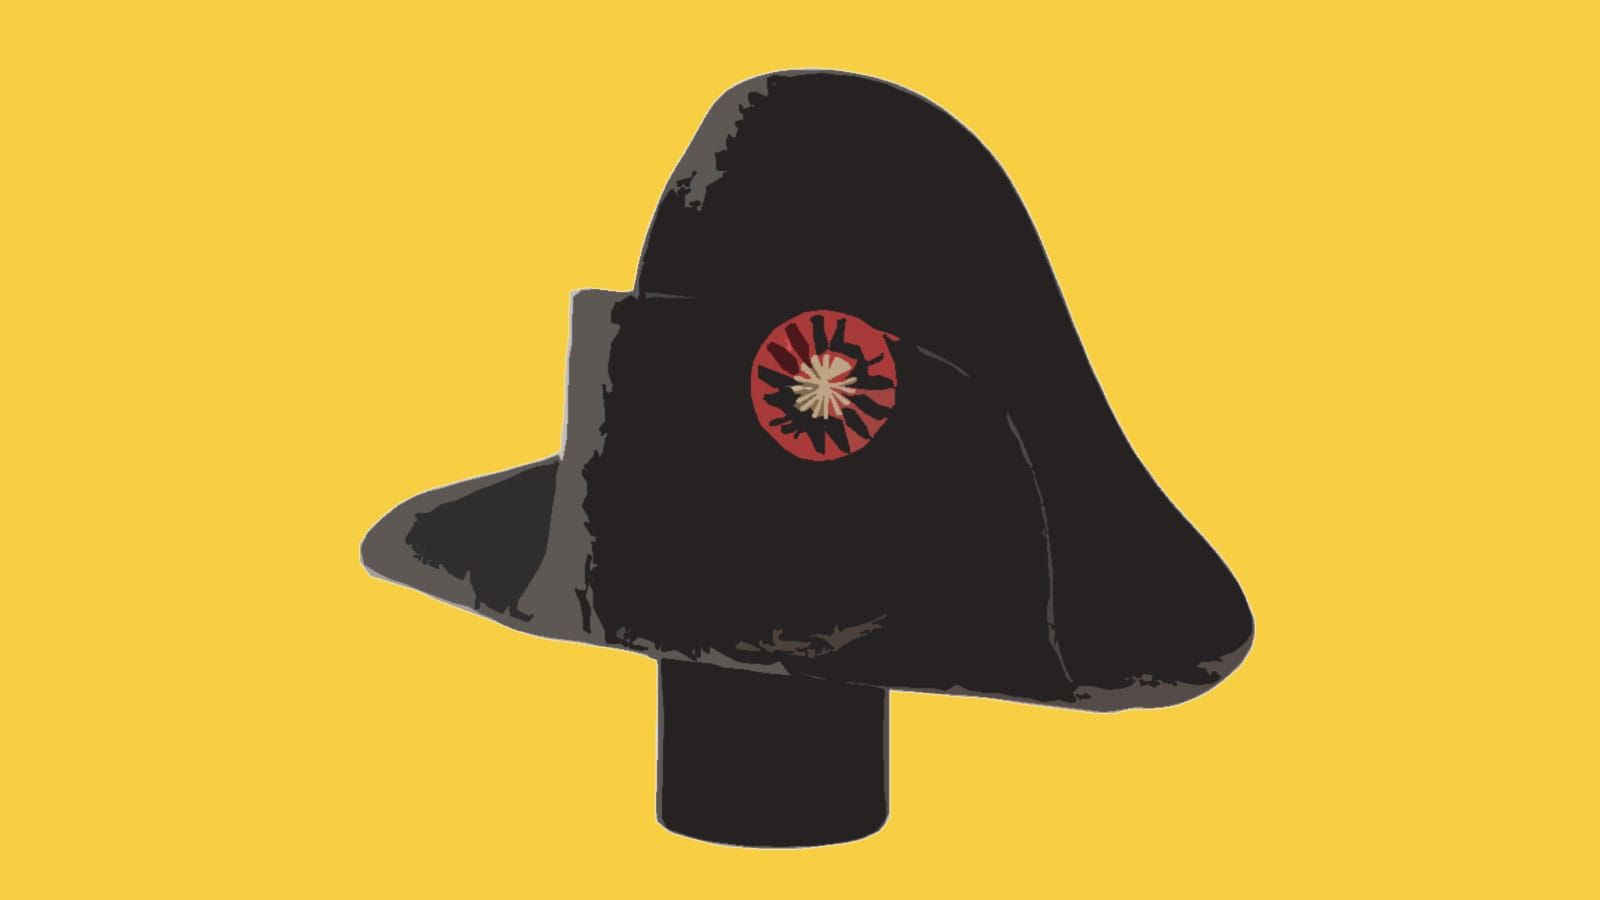 Illustration based on the hat Napoleon wore at Waterloo, from the collection of Deutsches Historisches Museum